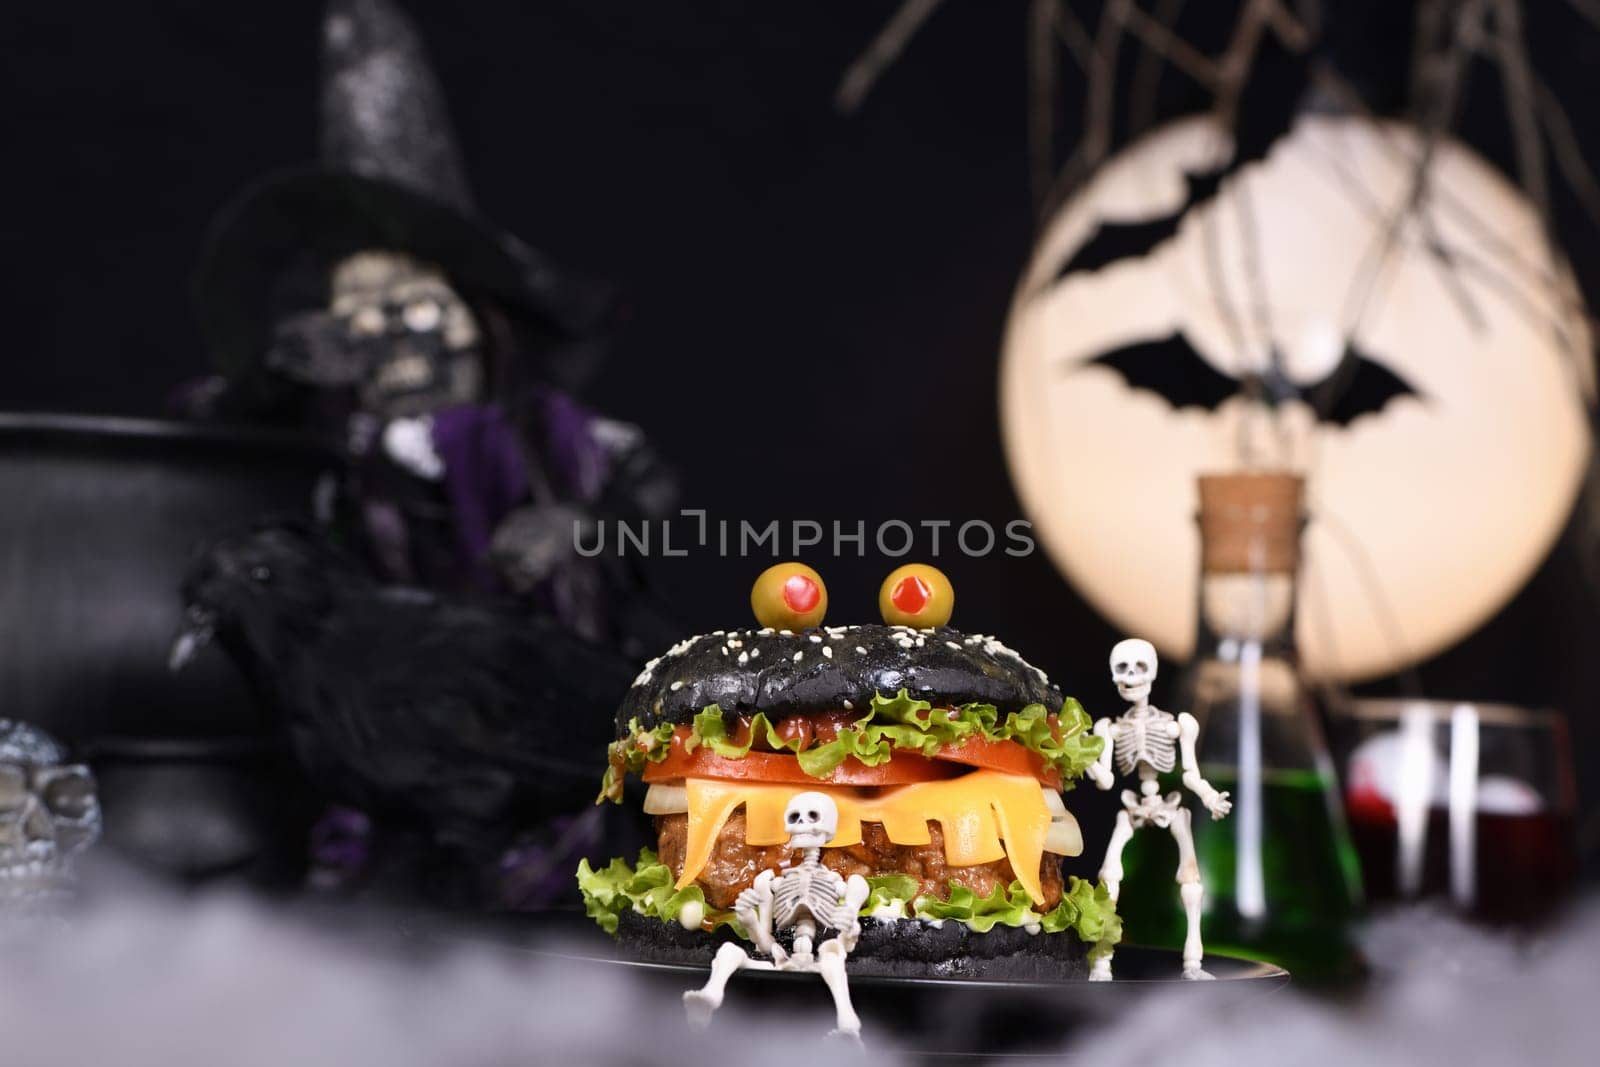 Monster Burger. Black bun, juicy beef cutlet, lettuce, onion, tomato and cheese in the shape of teeth, in the company of skeletons. Definitely a pick-me-up and a perfect Halloween party appetizer